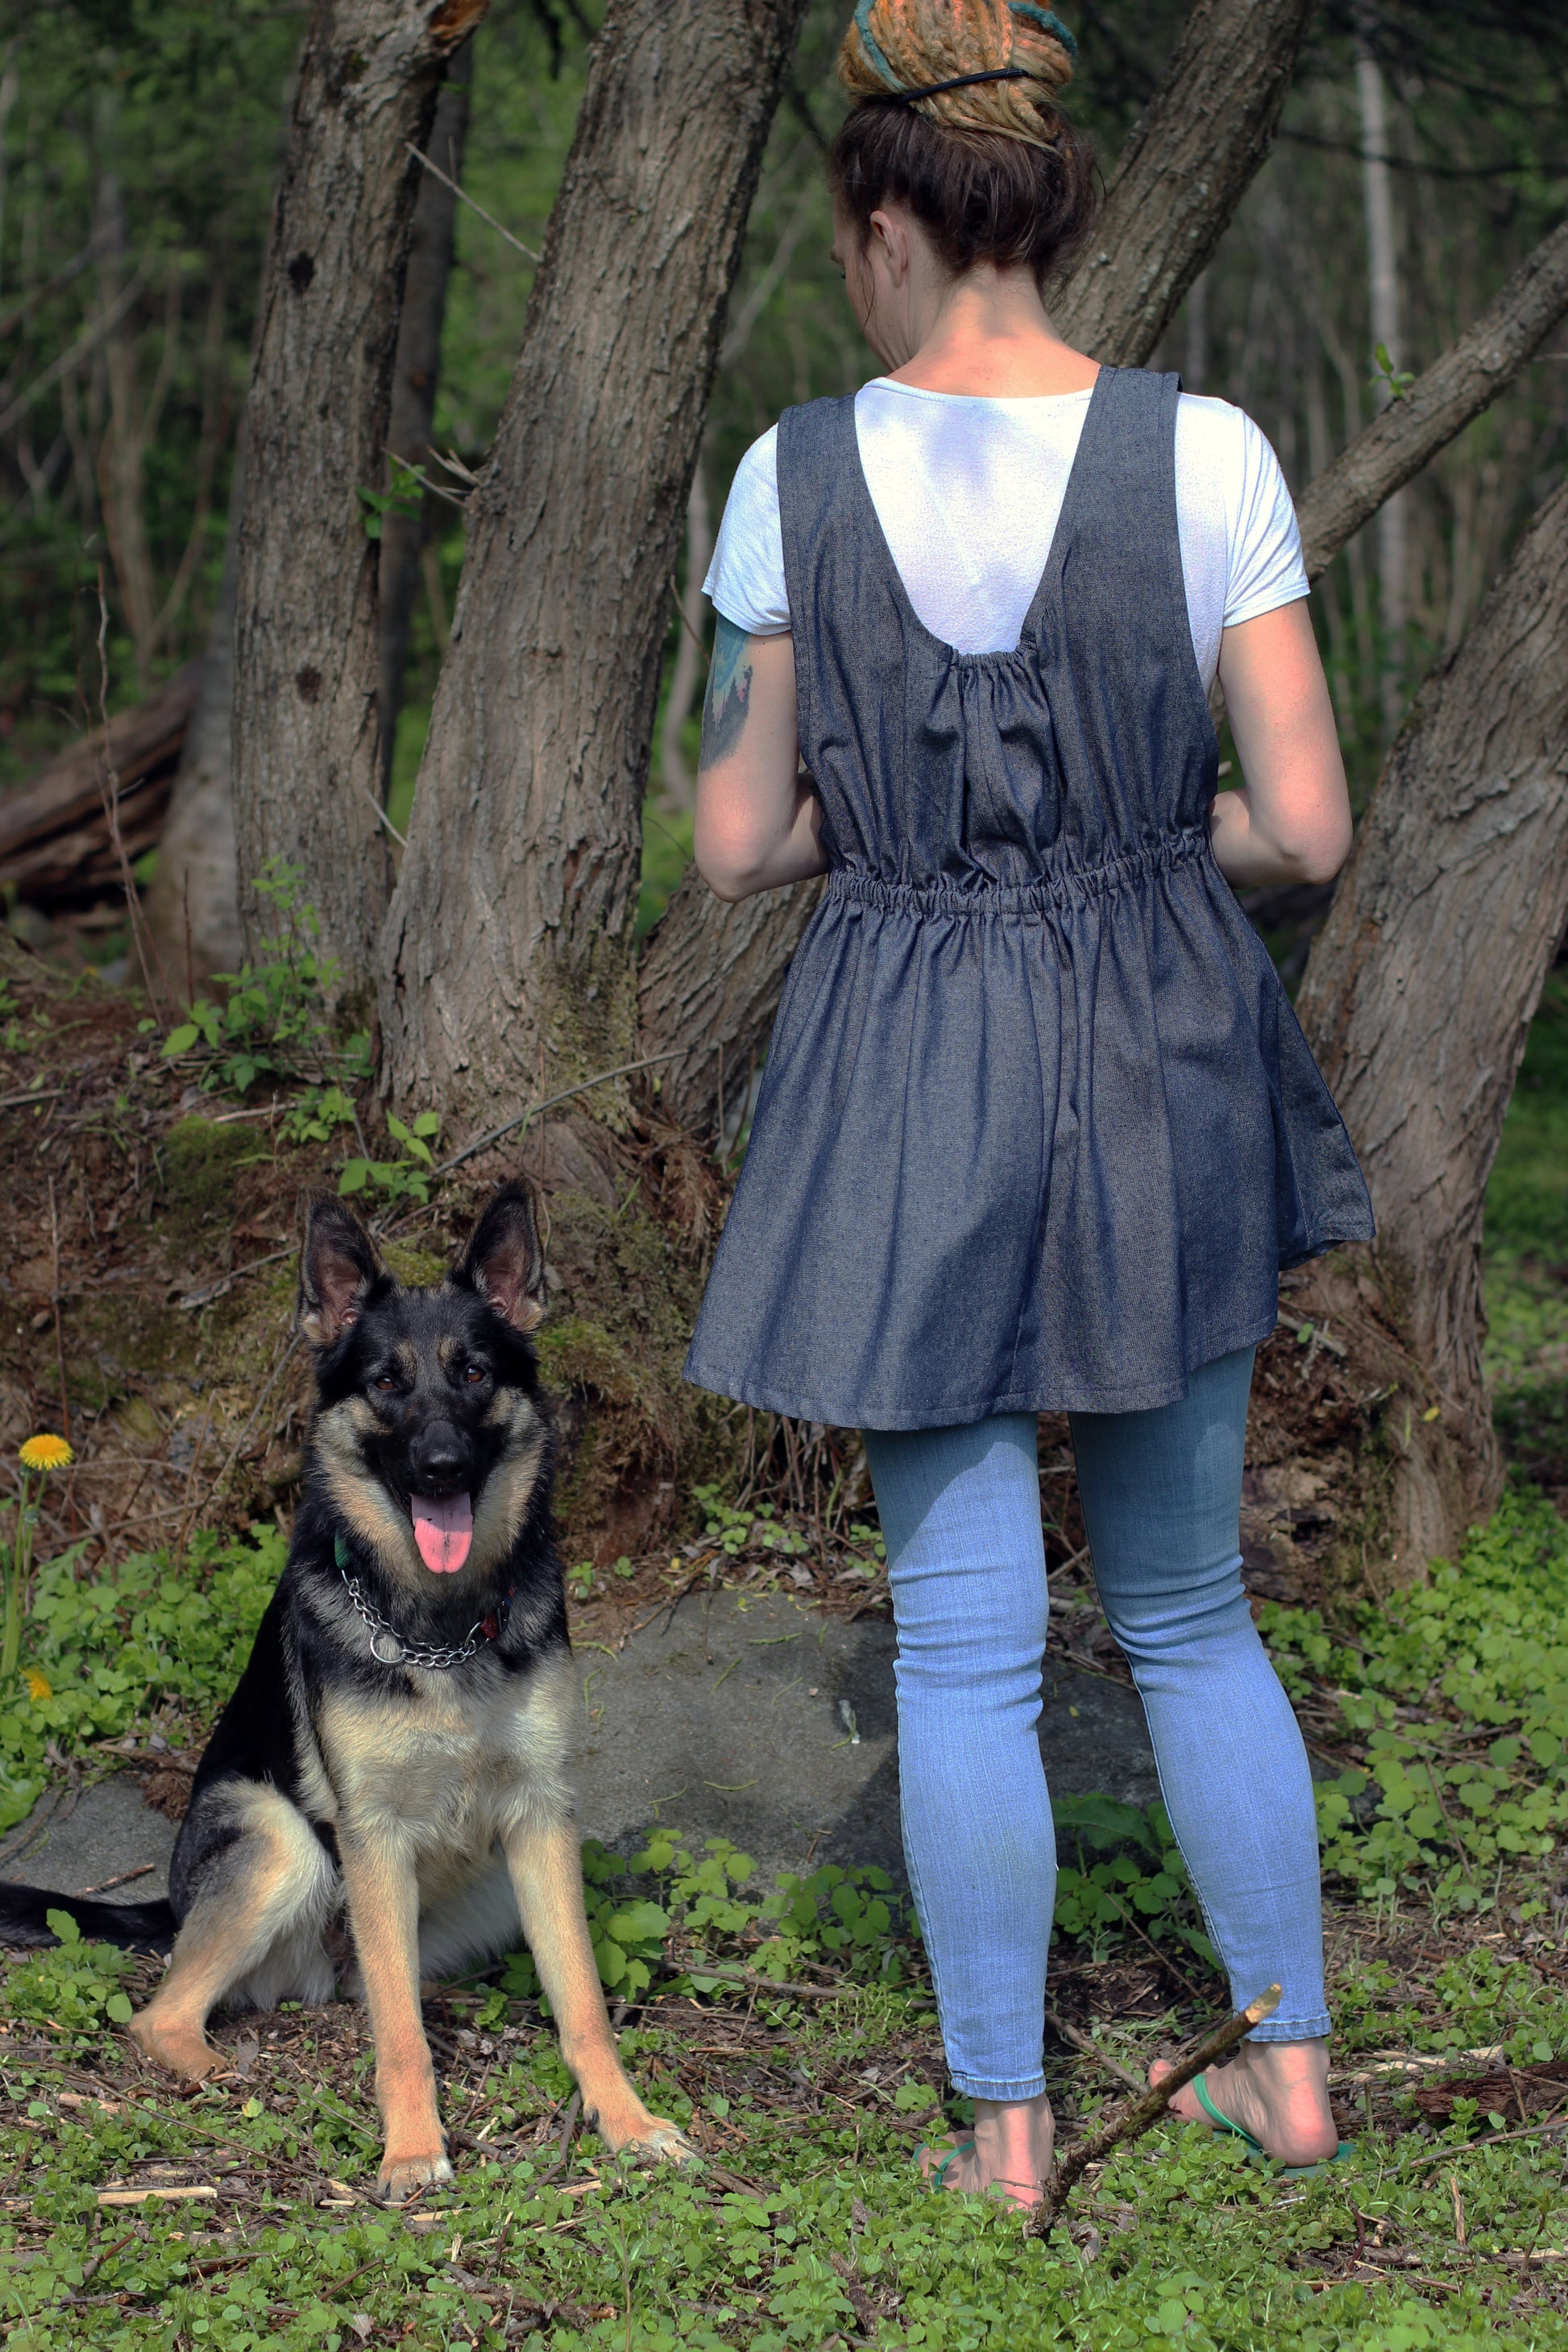 XS-5X Smock #2 in Denim - Back View with Dog